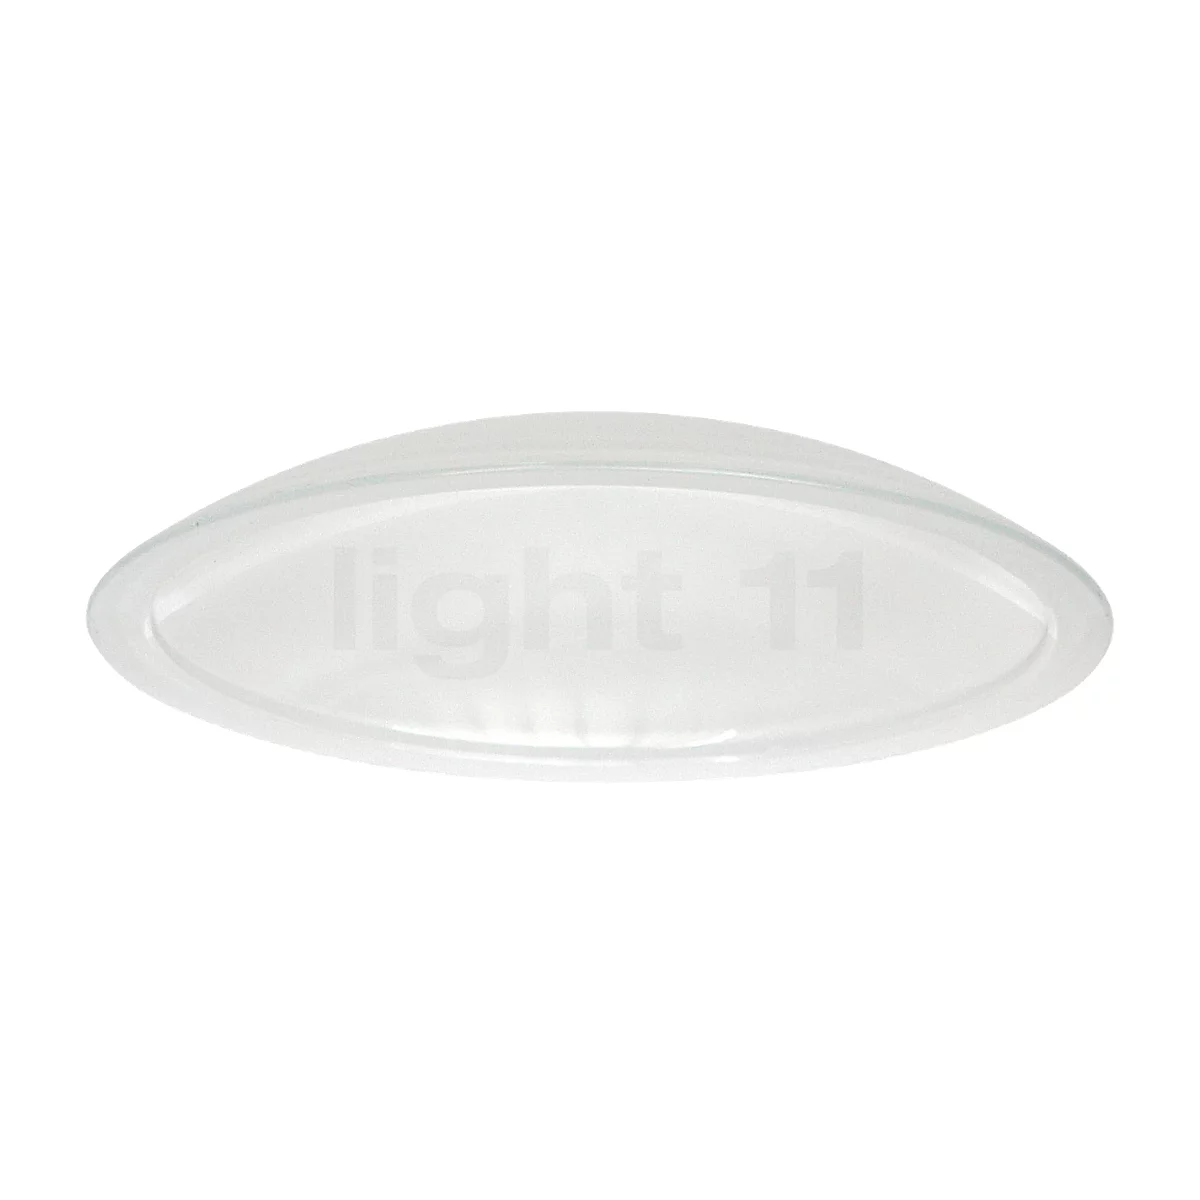 Finding the Perfect Fit: Selecting Ceiling Light Replacement Glass缩略图